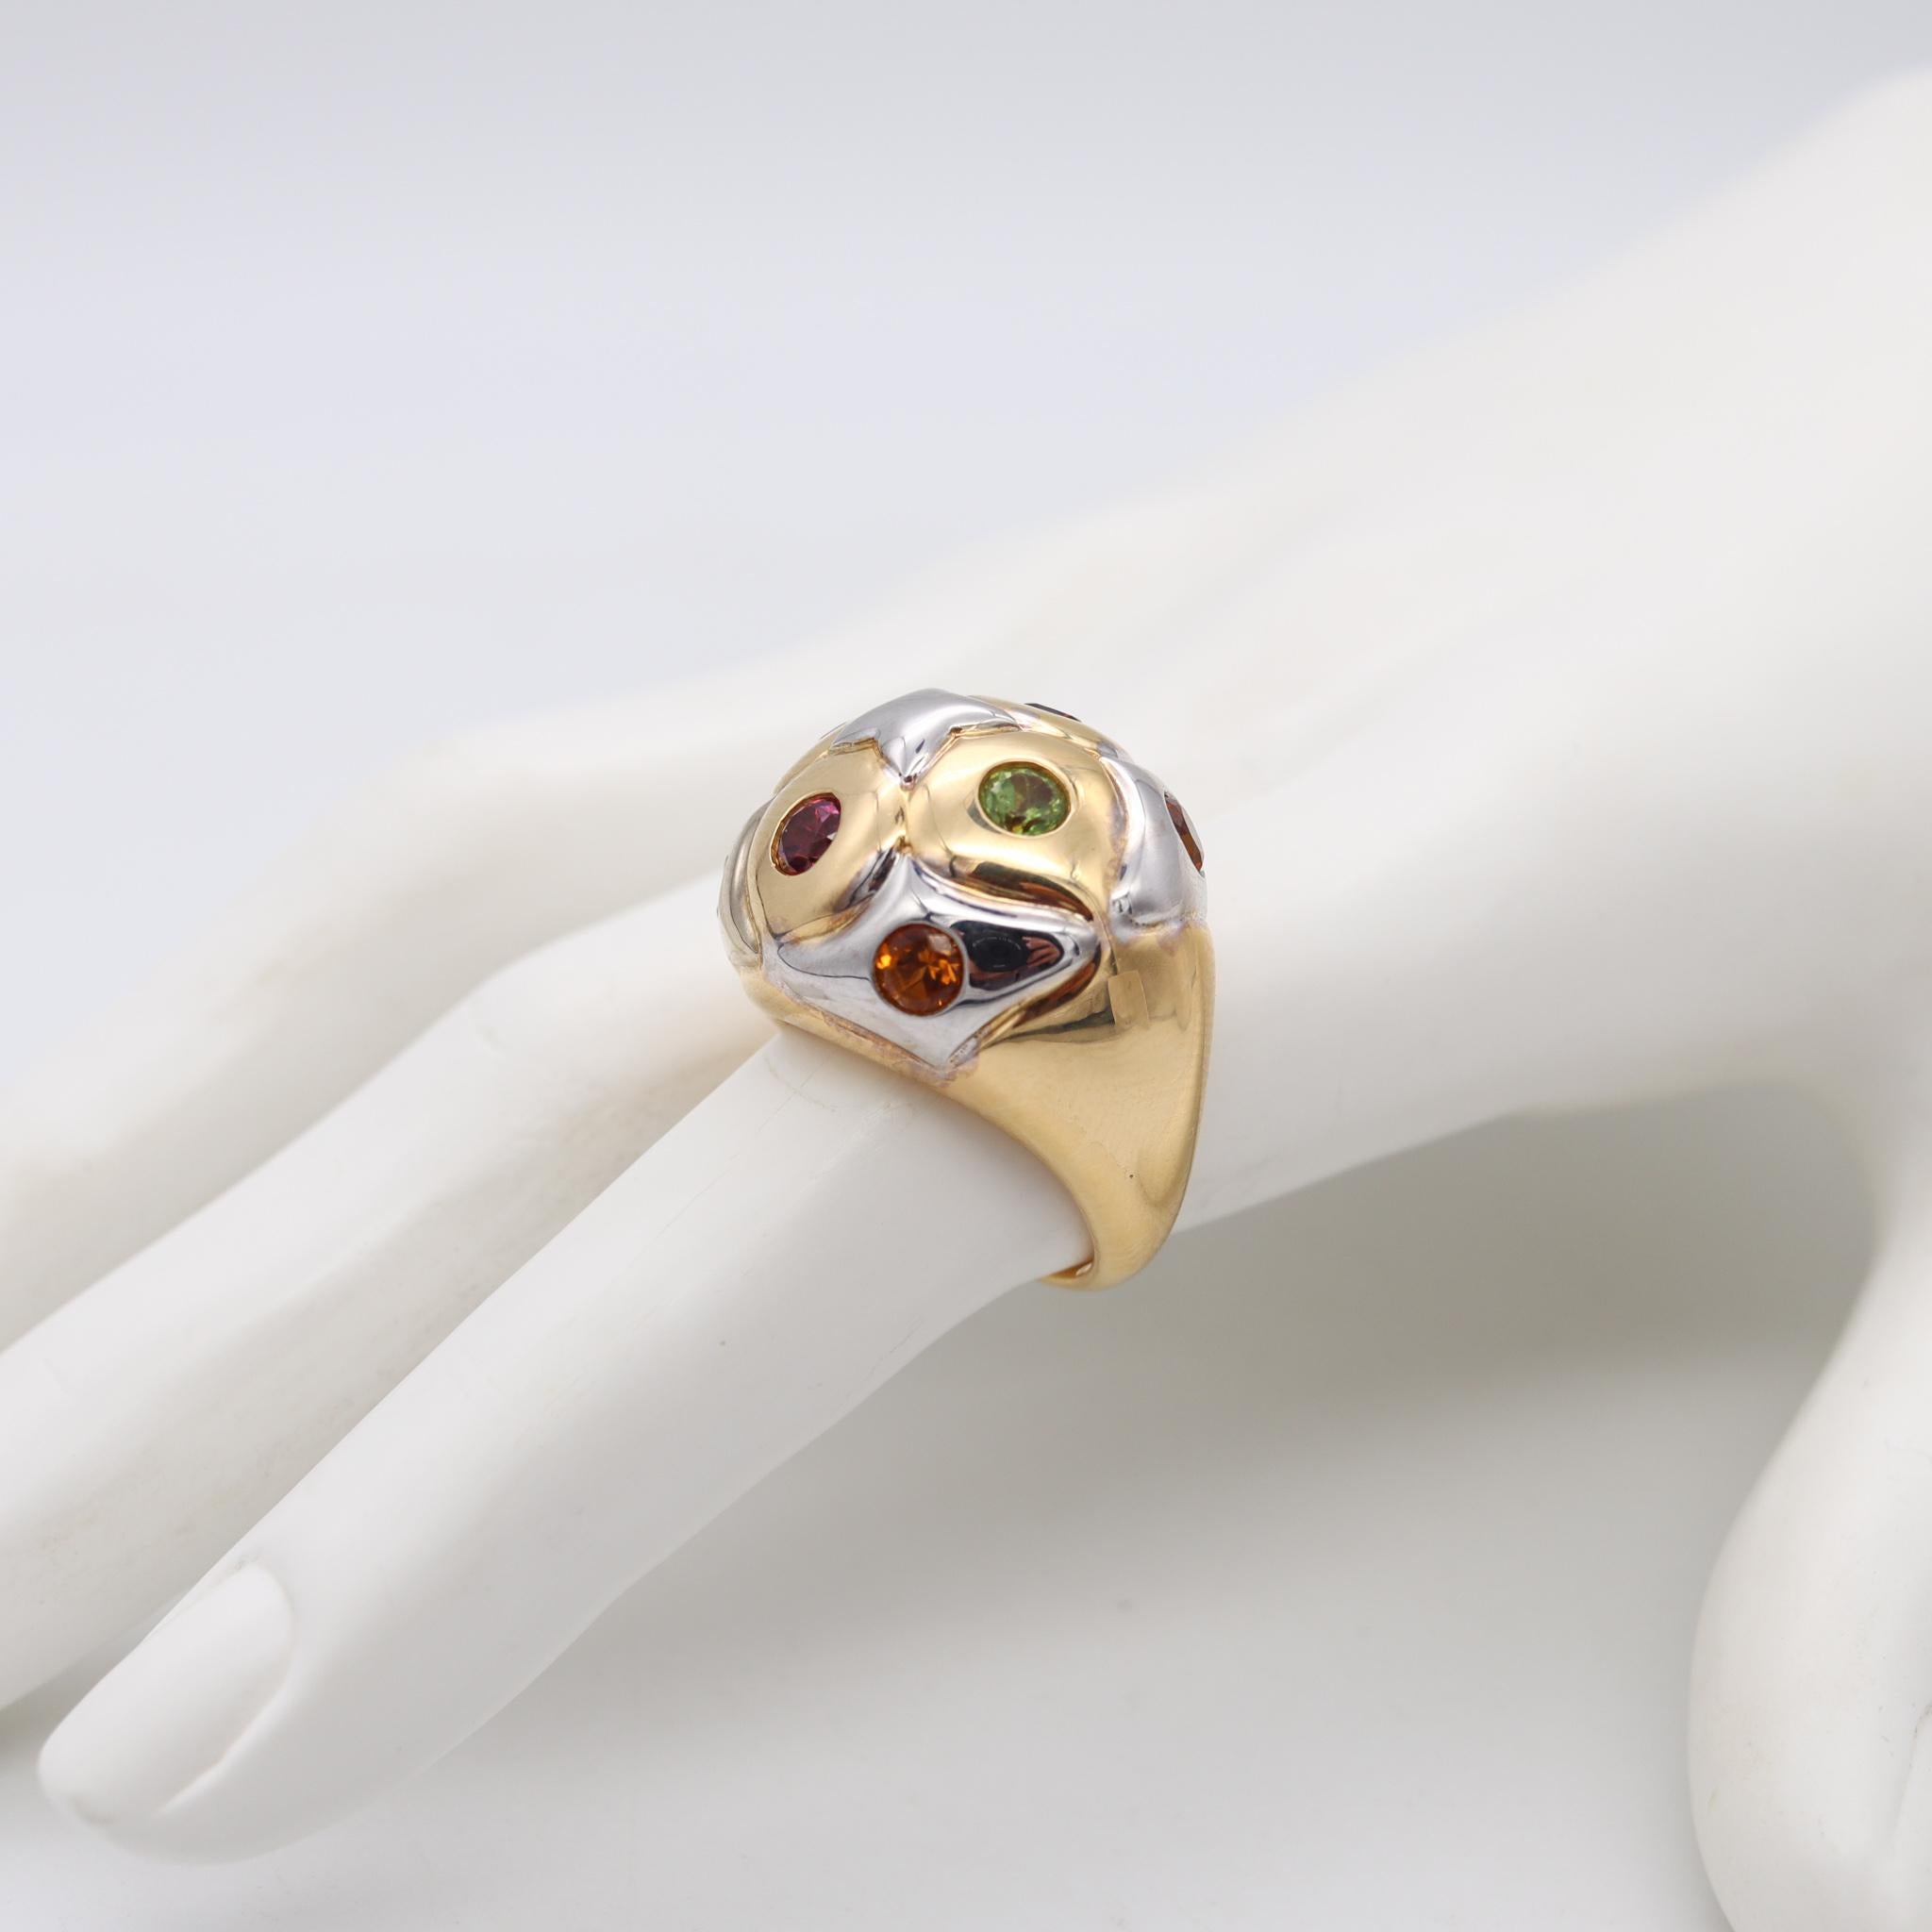 Brilliant Cut Bvlgari Roma Bombe Cocktail Ring Two Tones of 18Kt Gold with 1.80 Ctw Gemstones